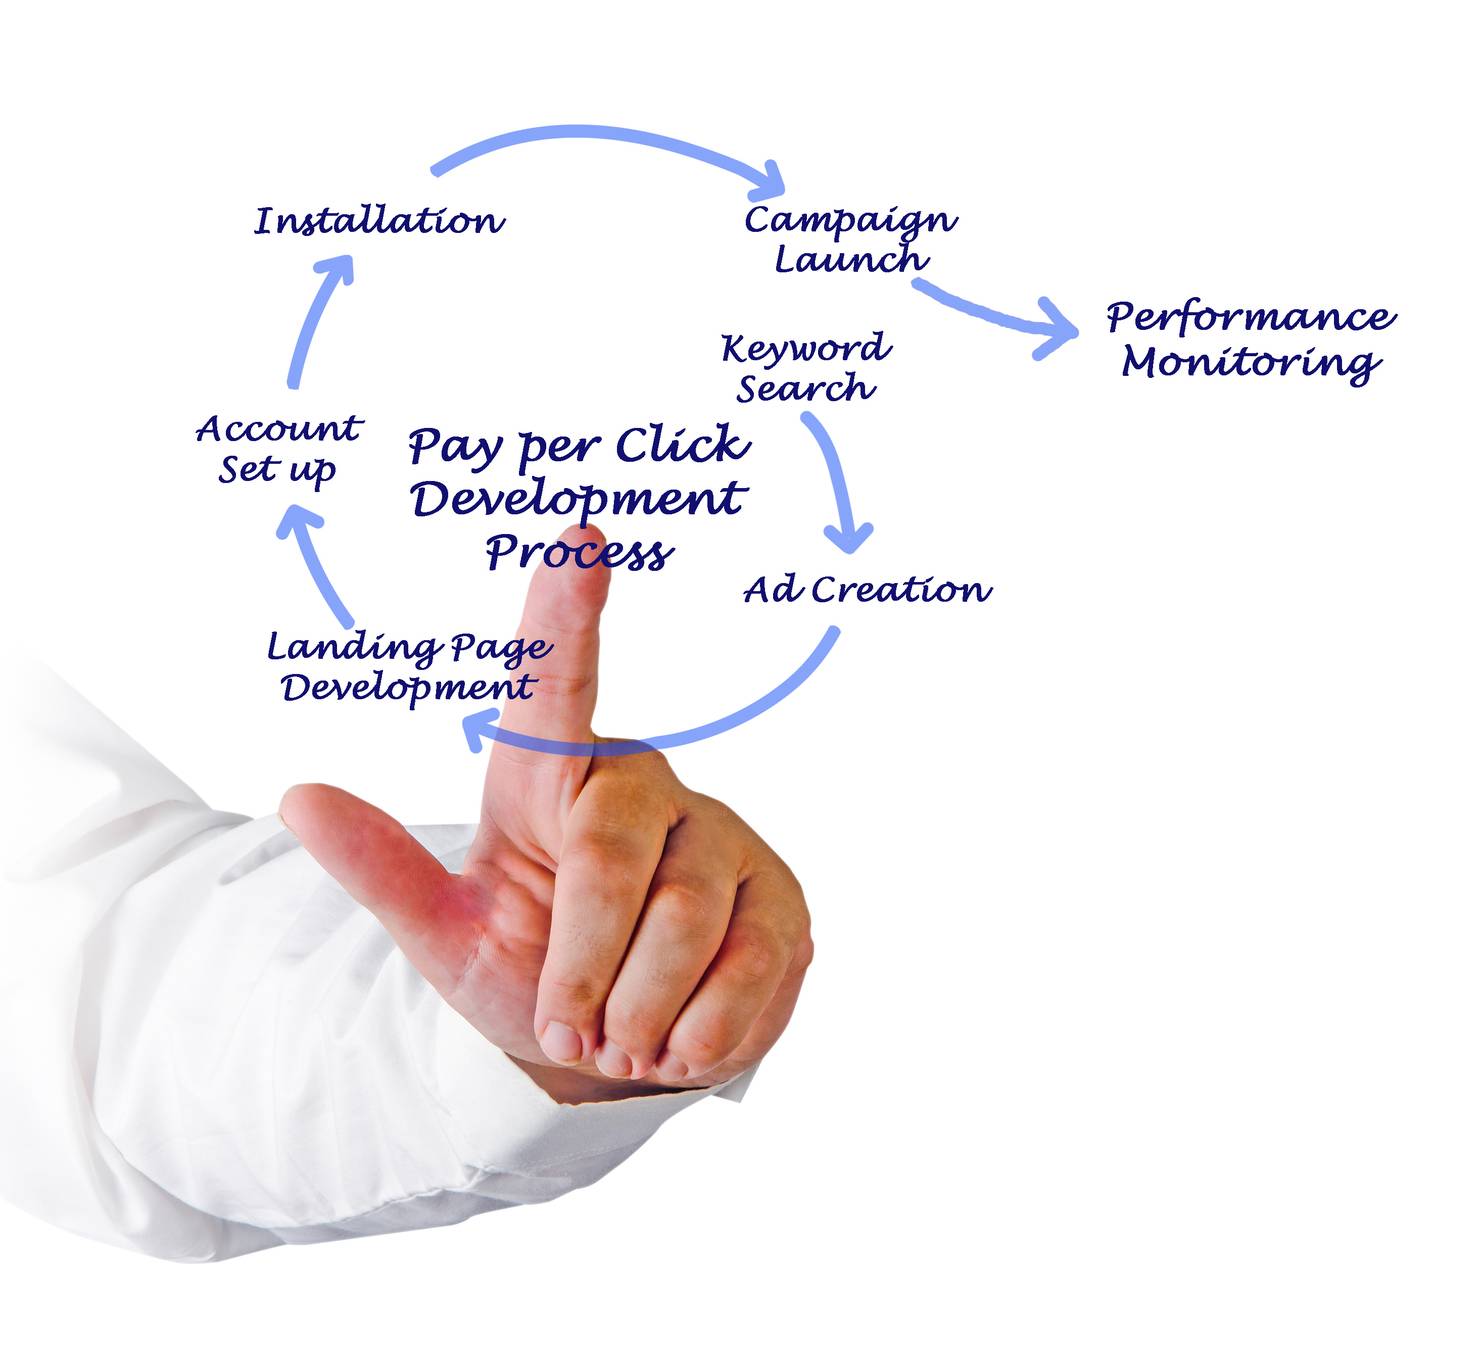 Get Better Click-Through Rates with PPC in McKinney TX